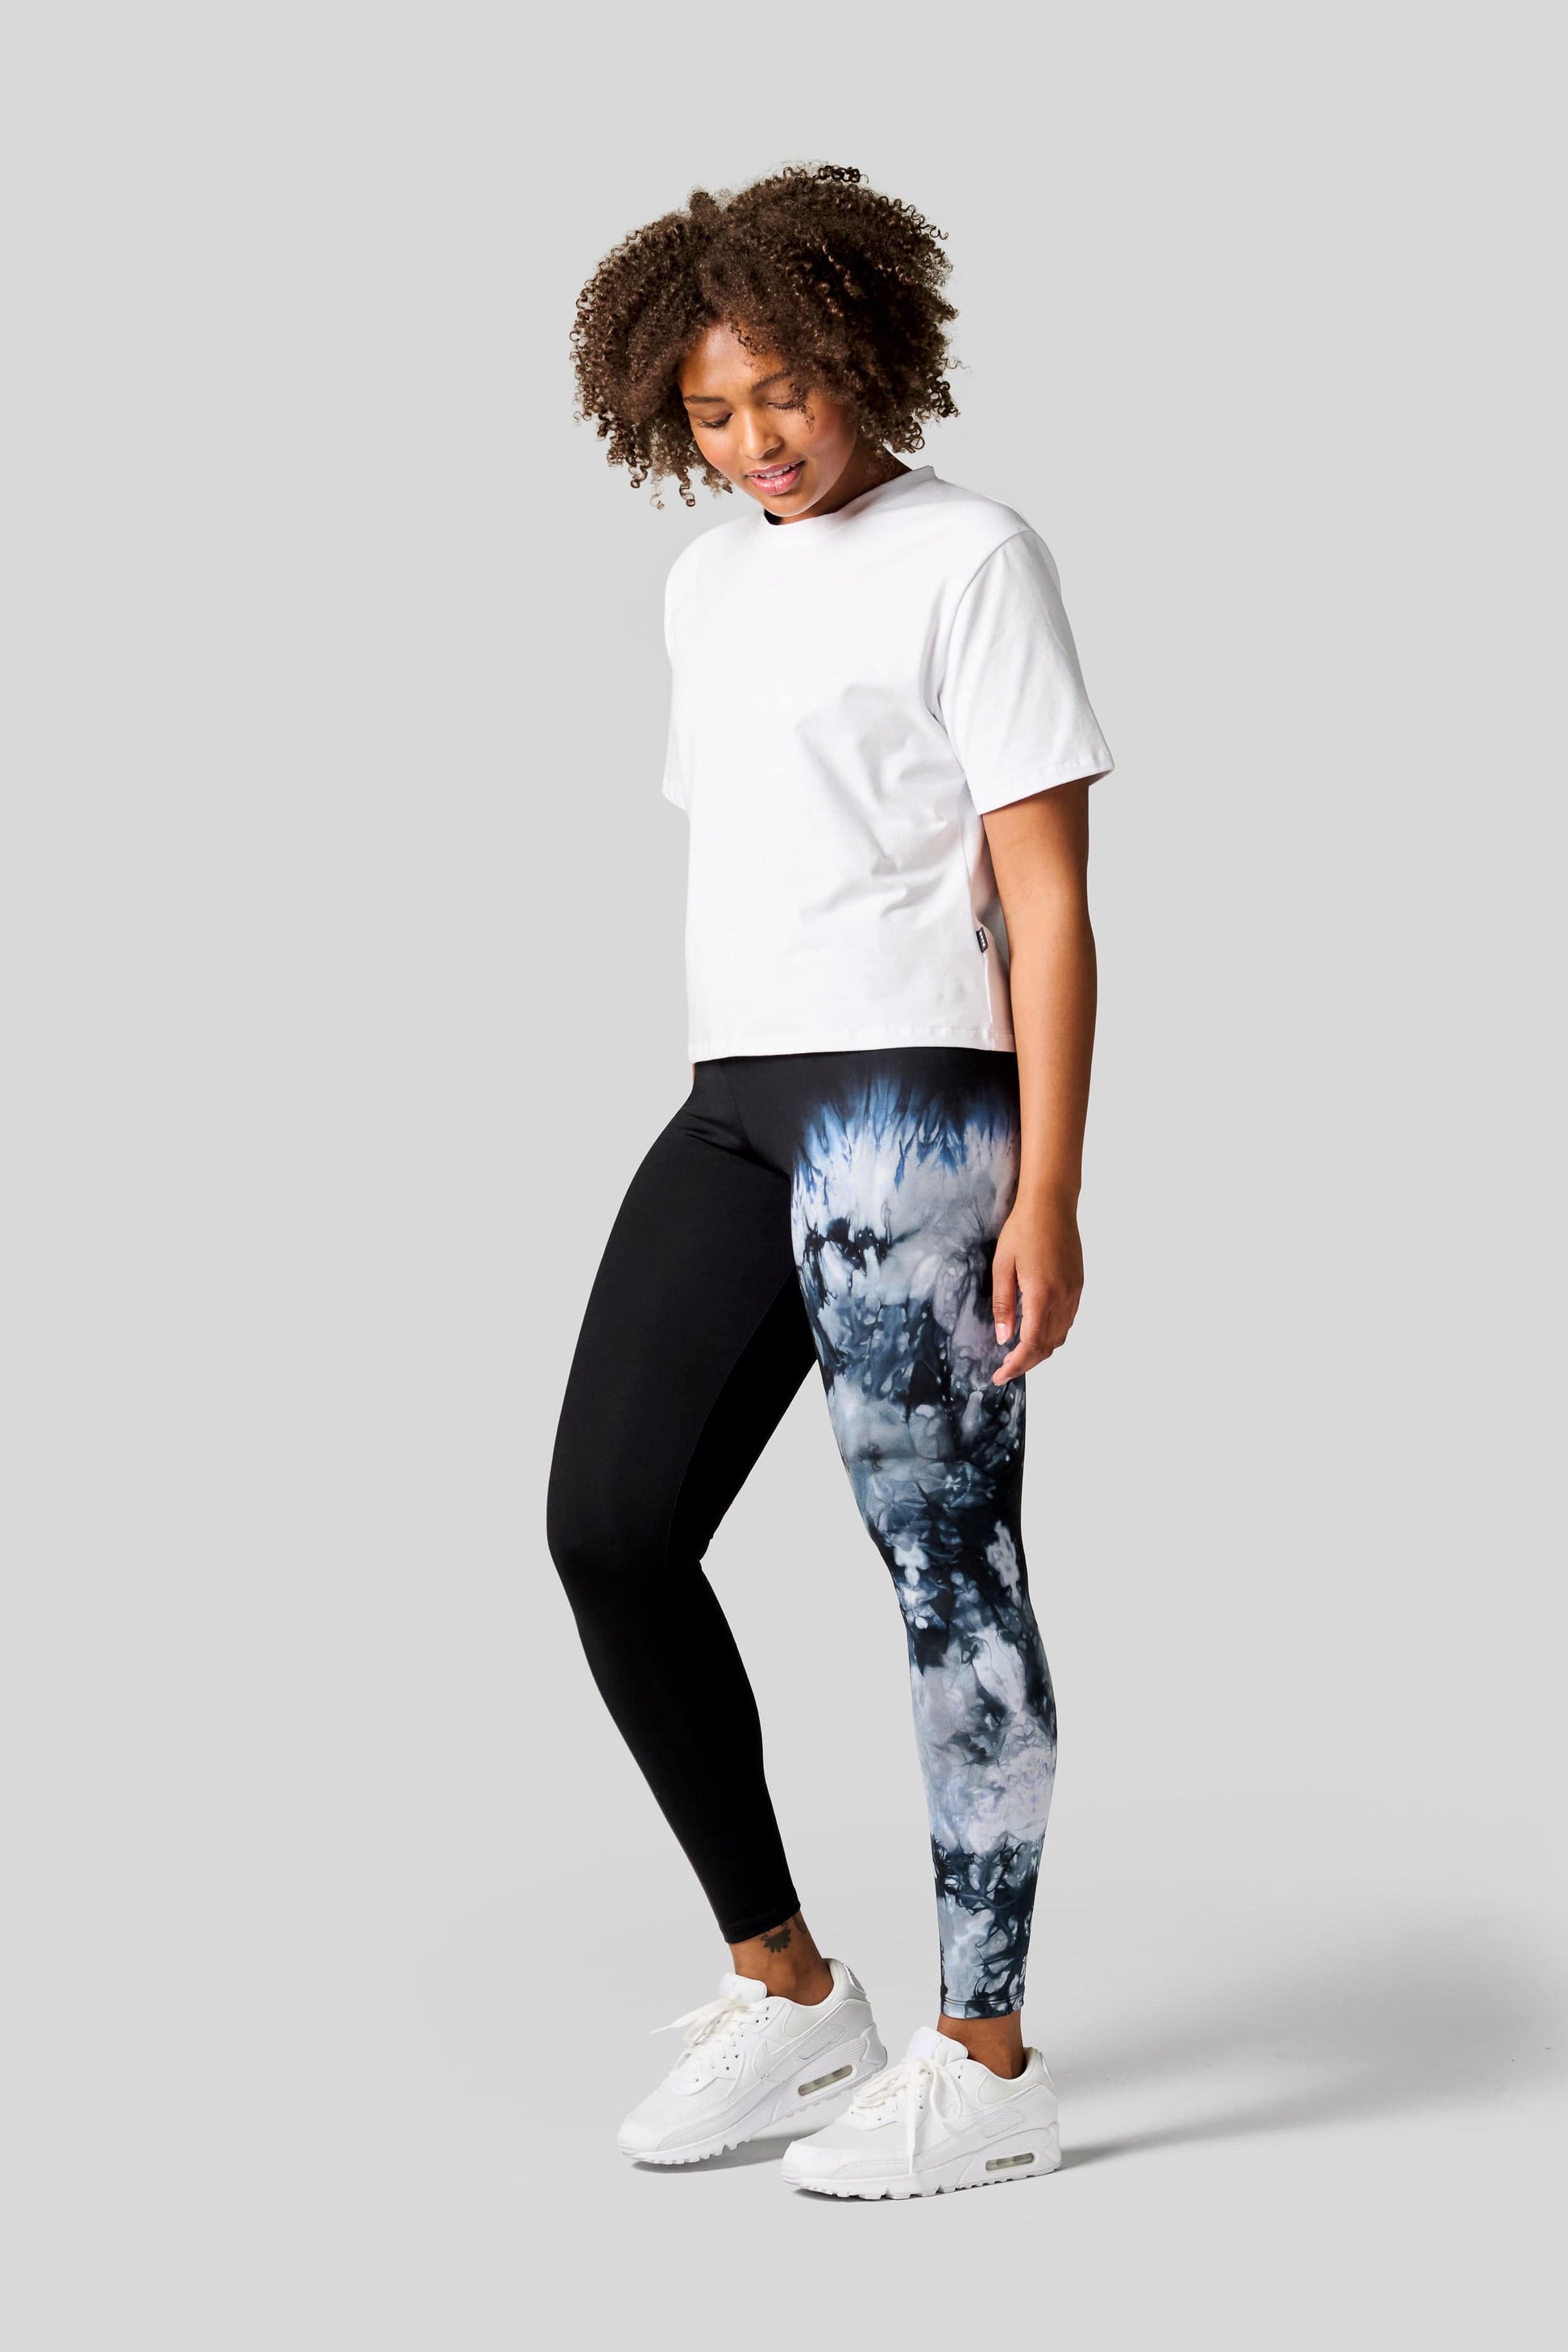 Woman wearing a white tee with one leg tie dye leggings and Nike Air Max shoes